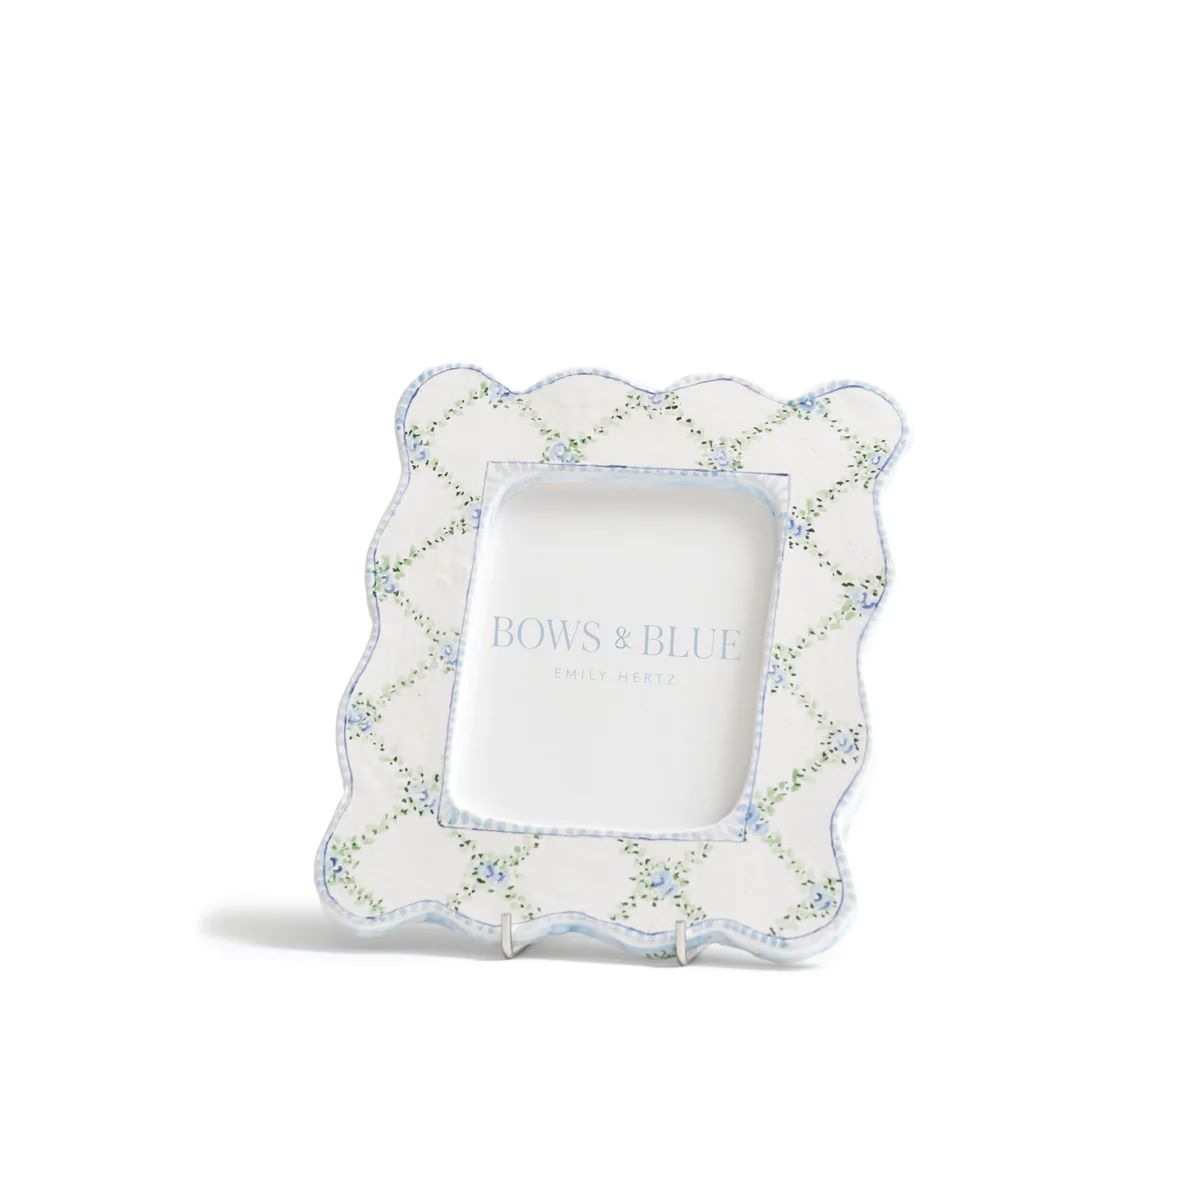 Scalloped Vine Picture Frame | Bows & Blue